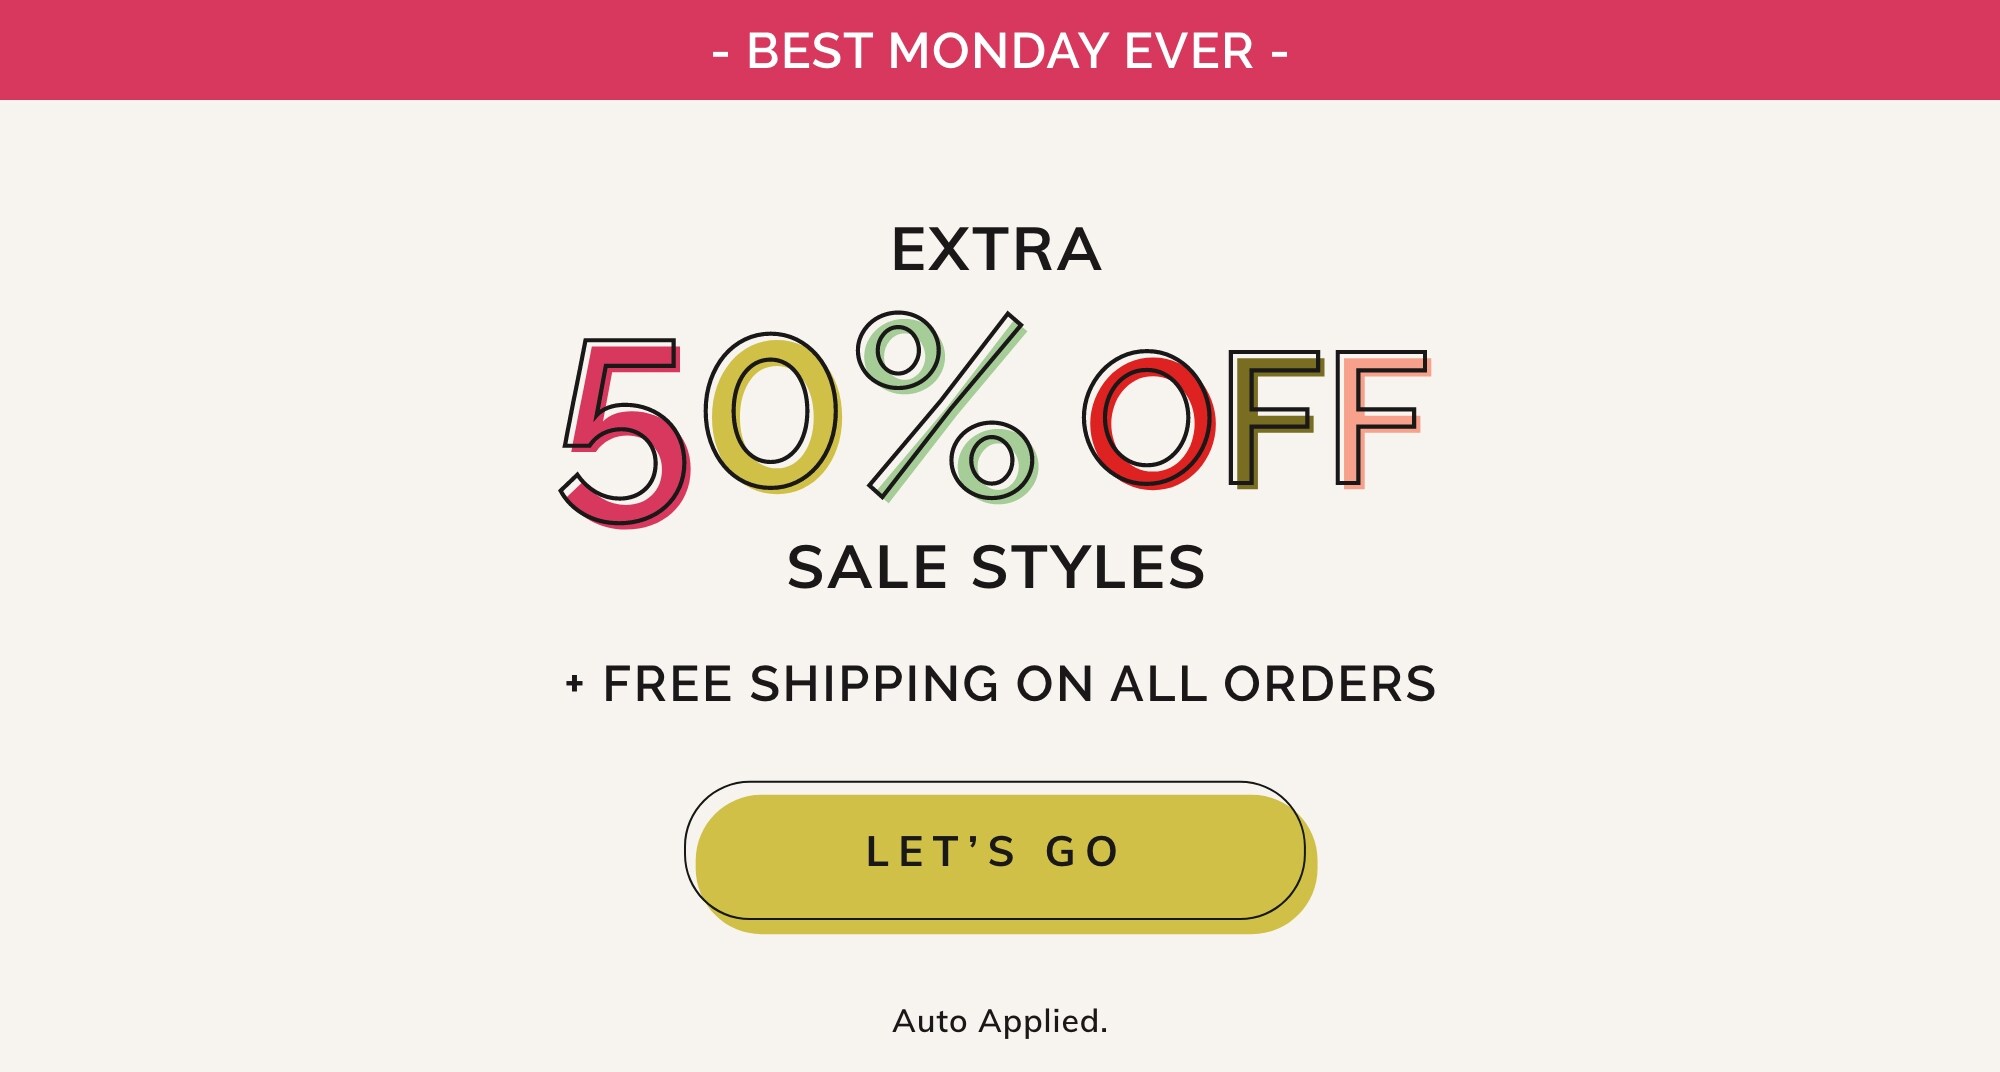 EXTRA 50% OFF SALE STYLES*  + FREE SHIPPING ON ALL ORDERS